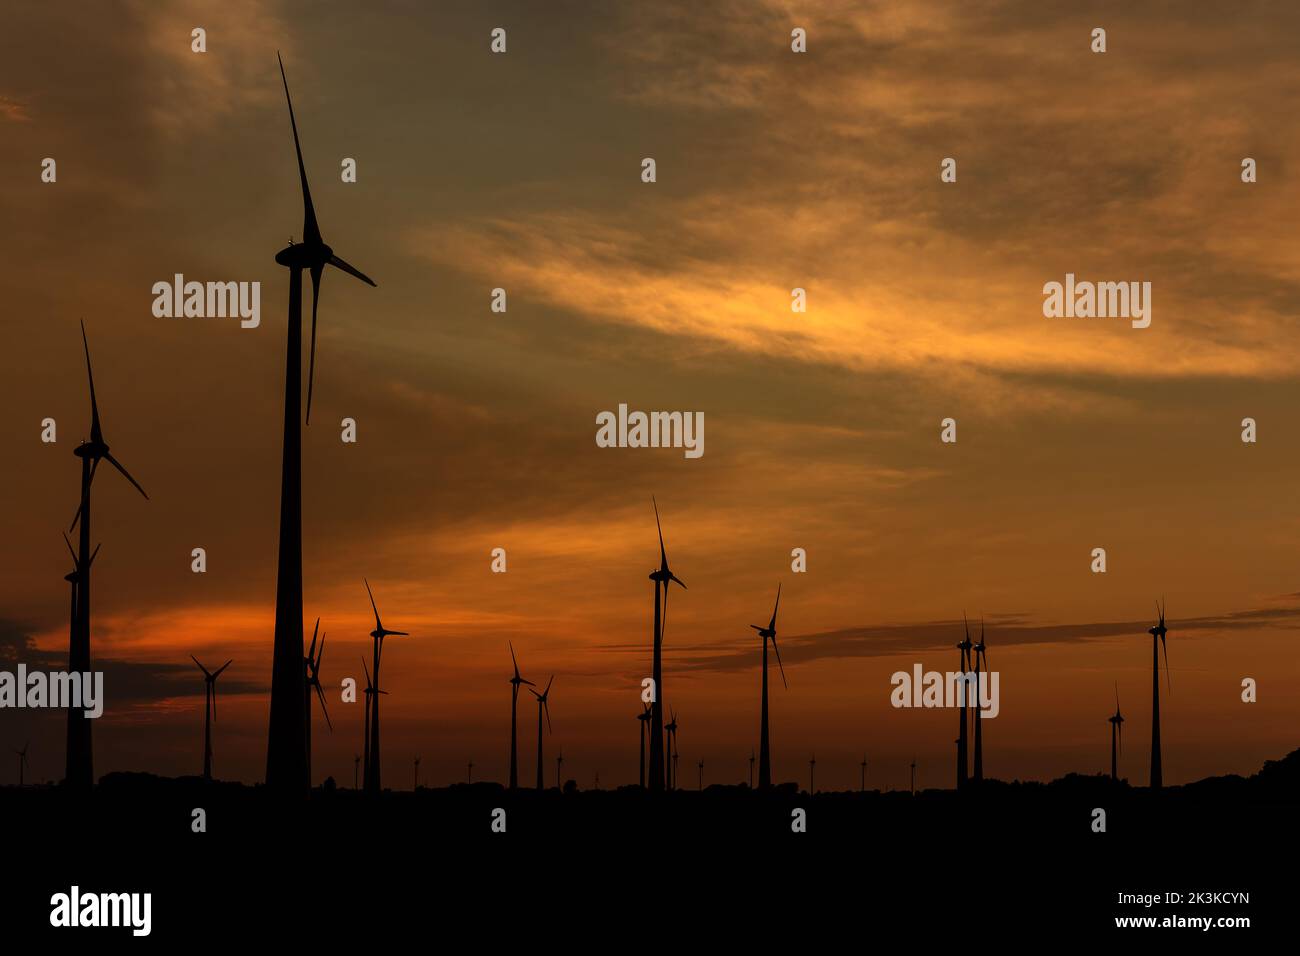 Silhouettes of wind turbines producing renewable energy at sunset Stock Photo